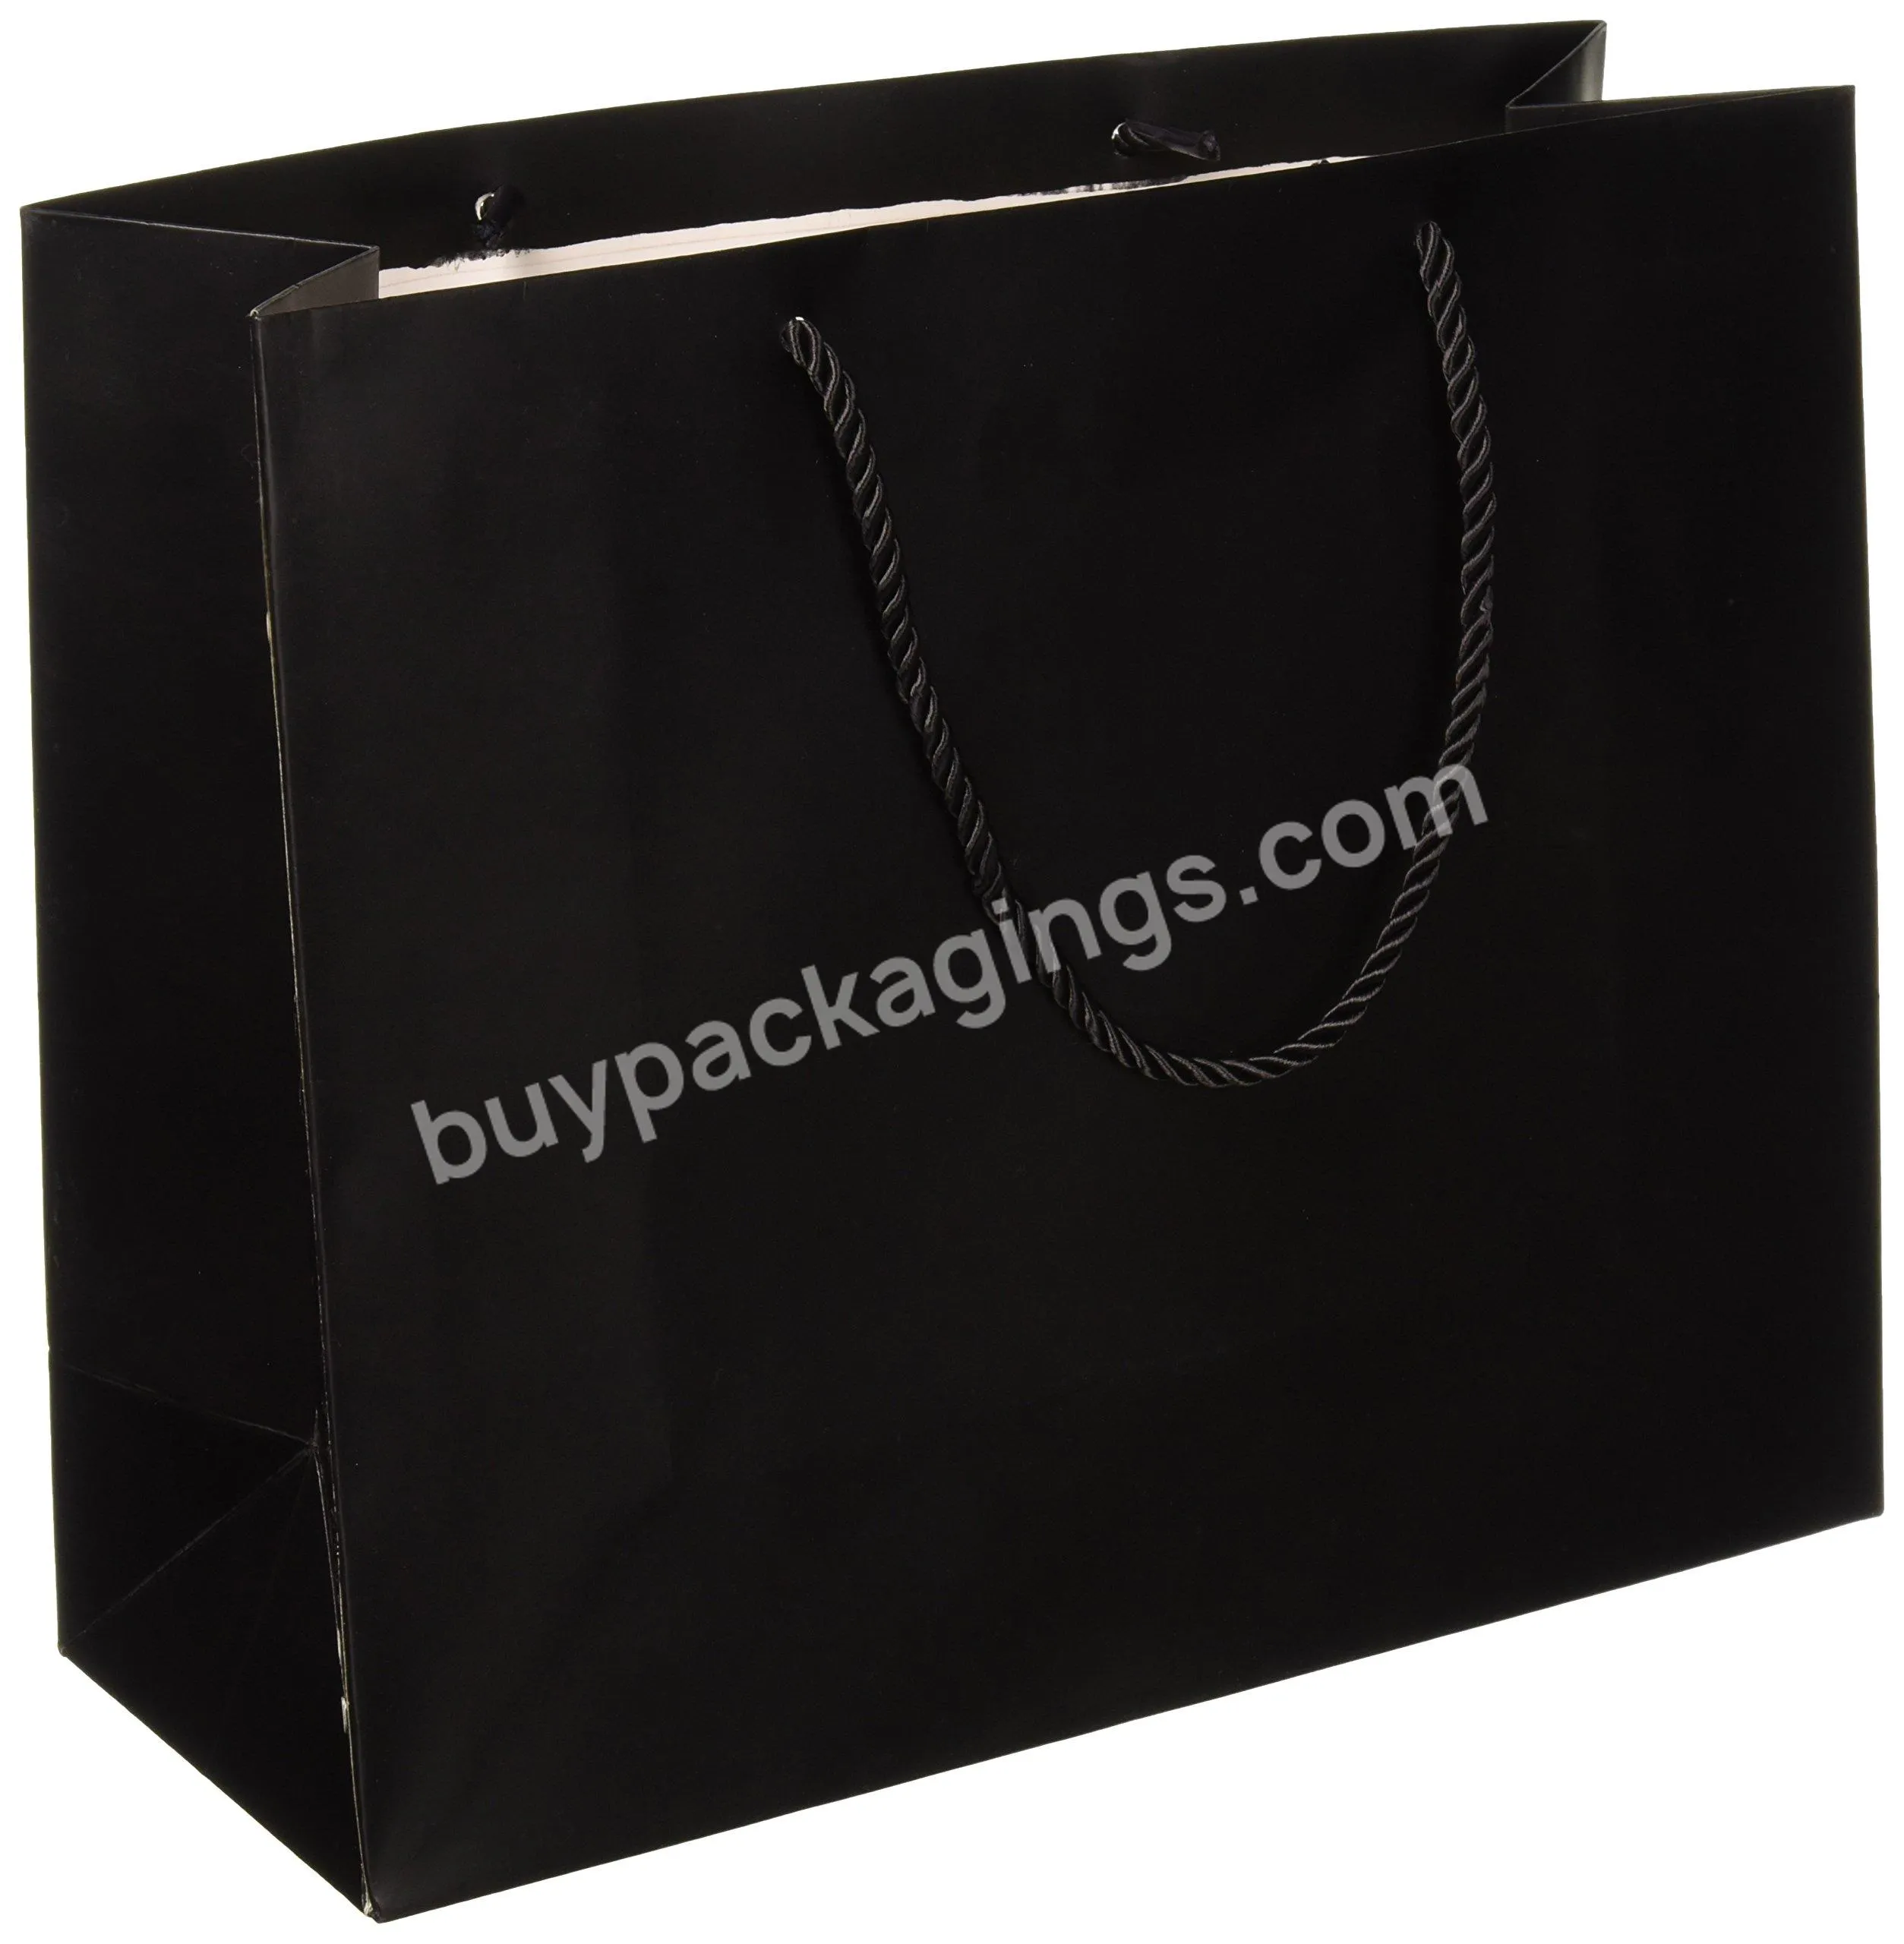 Custom logo printed luxury merchandise retail euro tote cardboard bag for packaging art paper shopping bags for clothesclothing